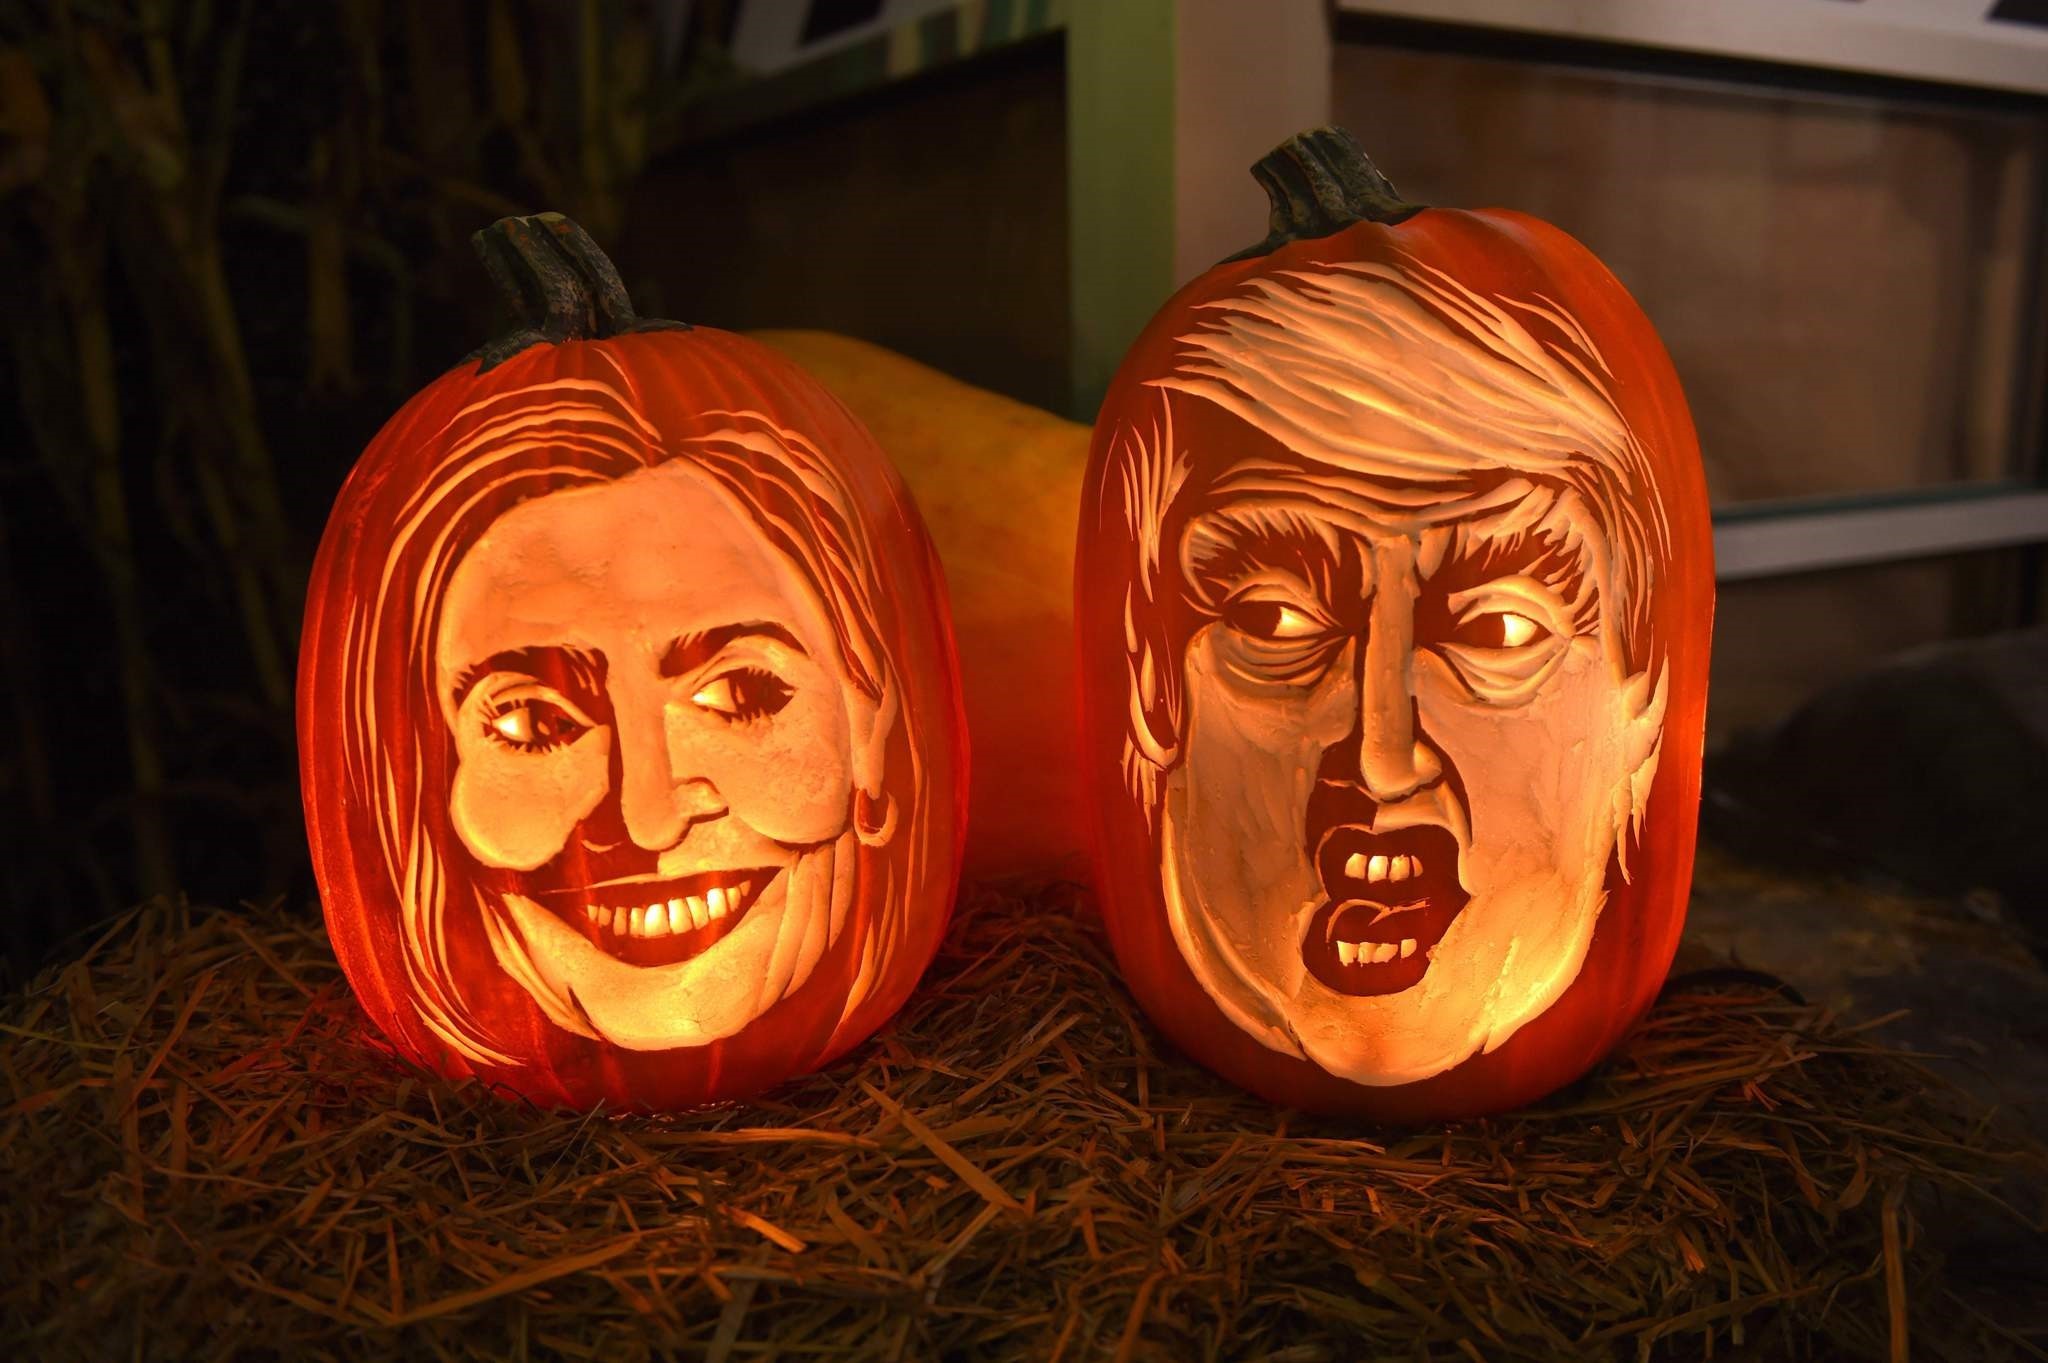 This file photo taken on October 28, 2016 shows styrofoam carvings on display of Democratic presidential nominee Hillary Clinton and her Republican counterpart Donald Trump at the Chelsea Market in New York. (AFP Photo)